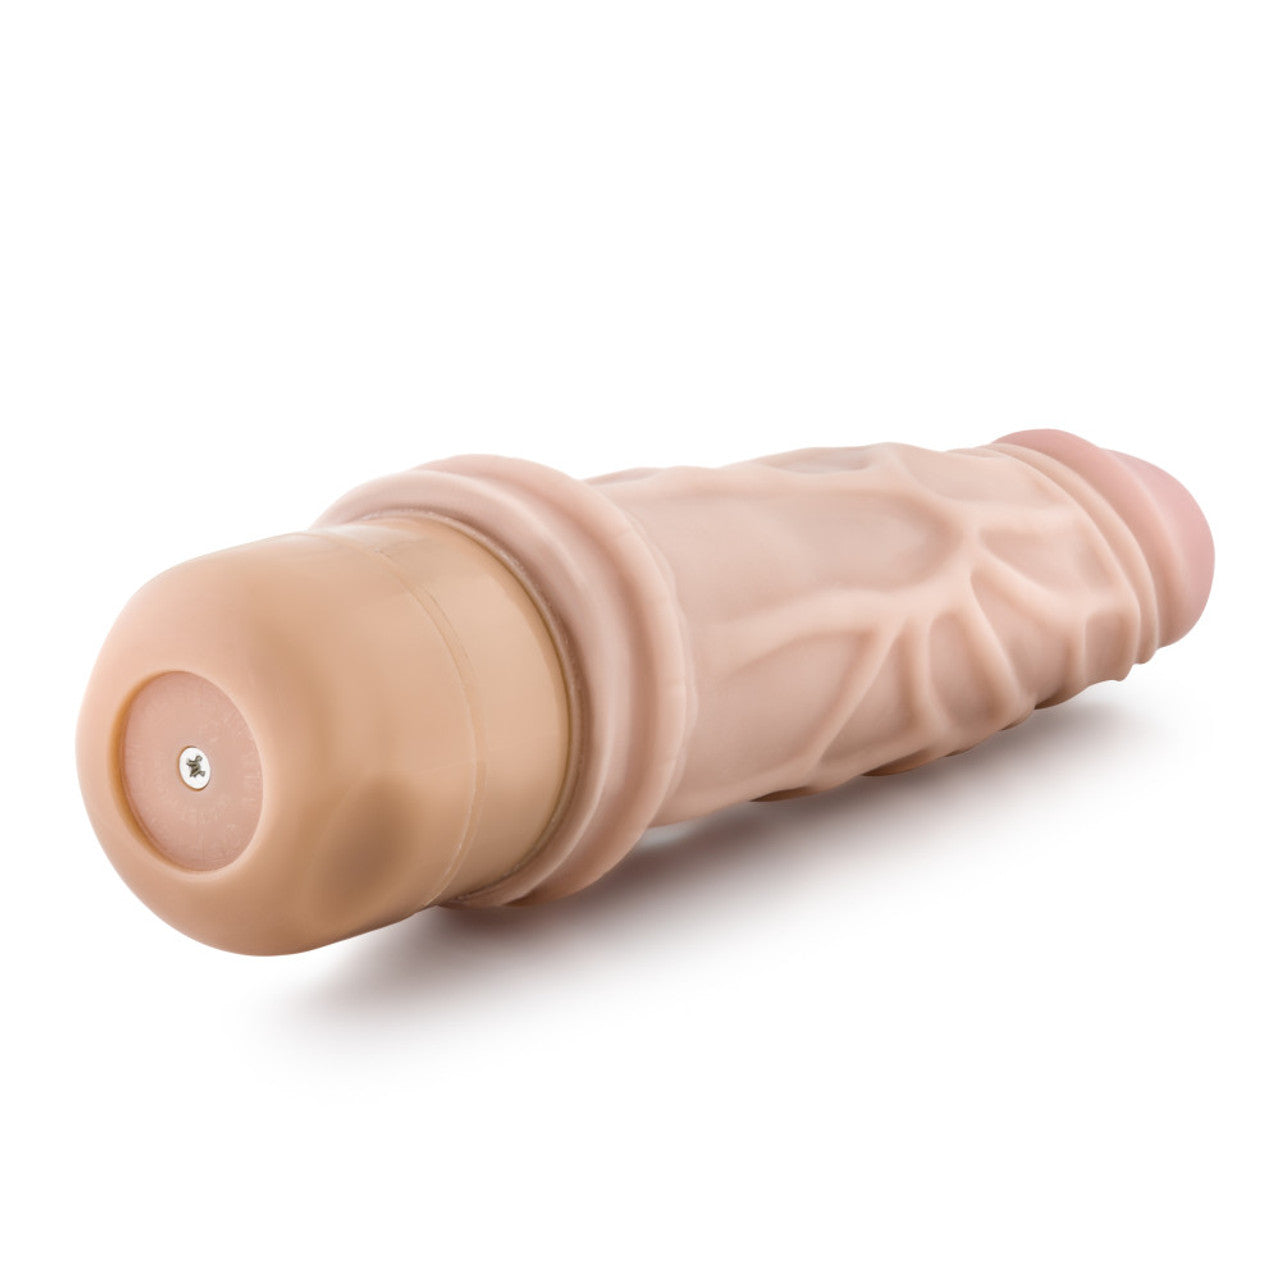 Dr. Skin Cock Vibe 2 9 Inch Vibrating Cock - Beige - Thorn & Feather